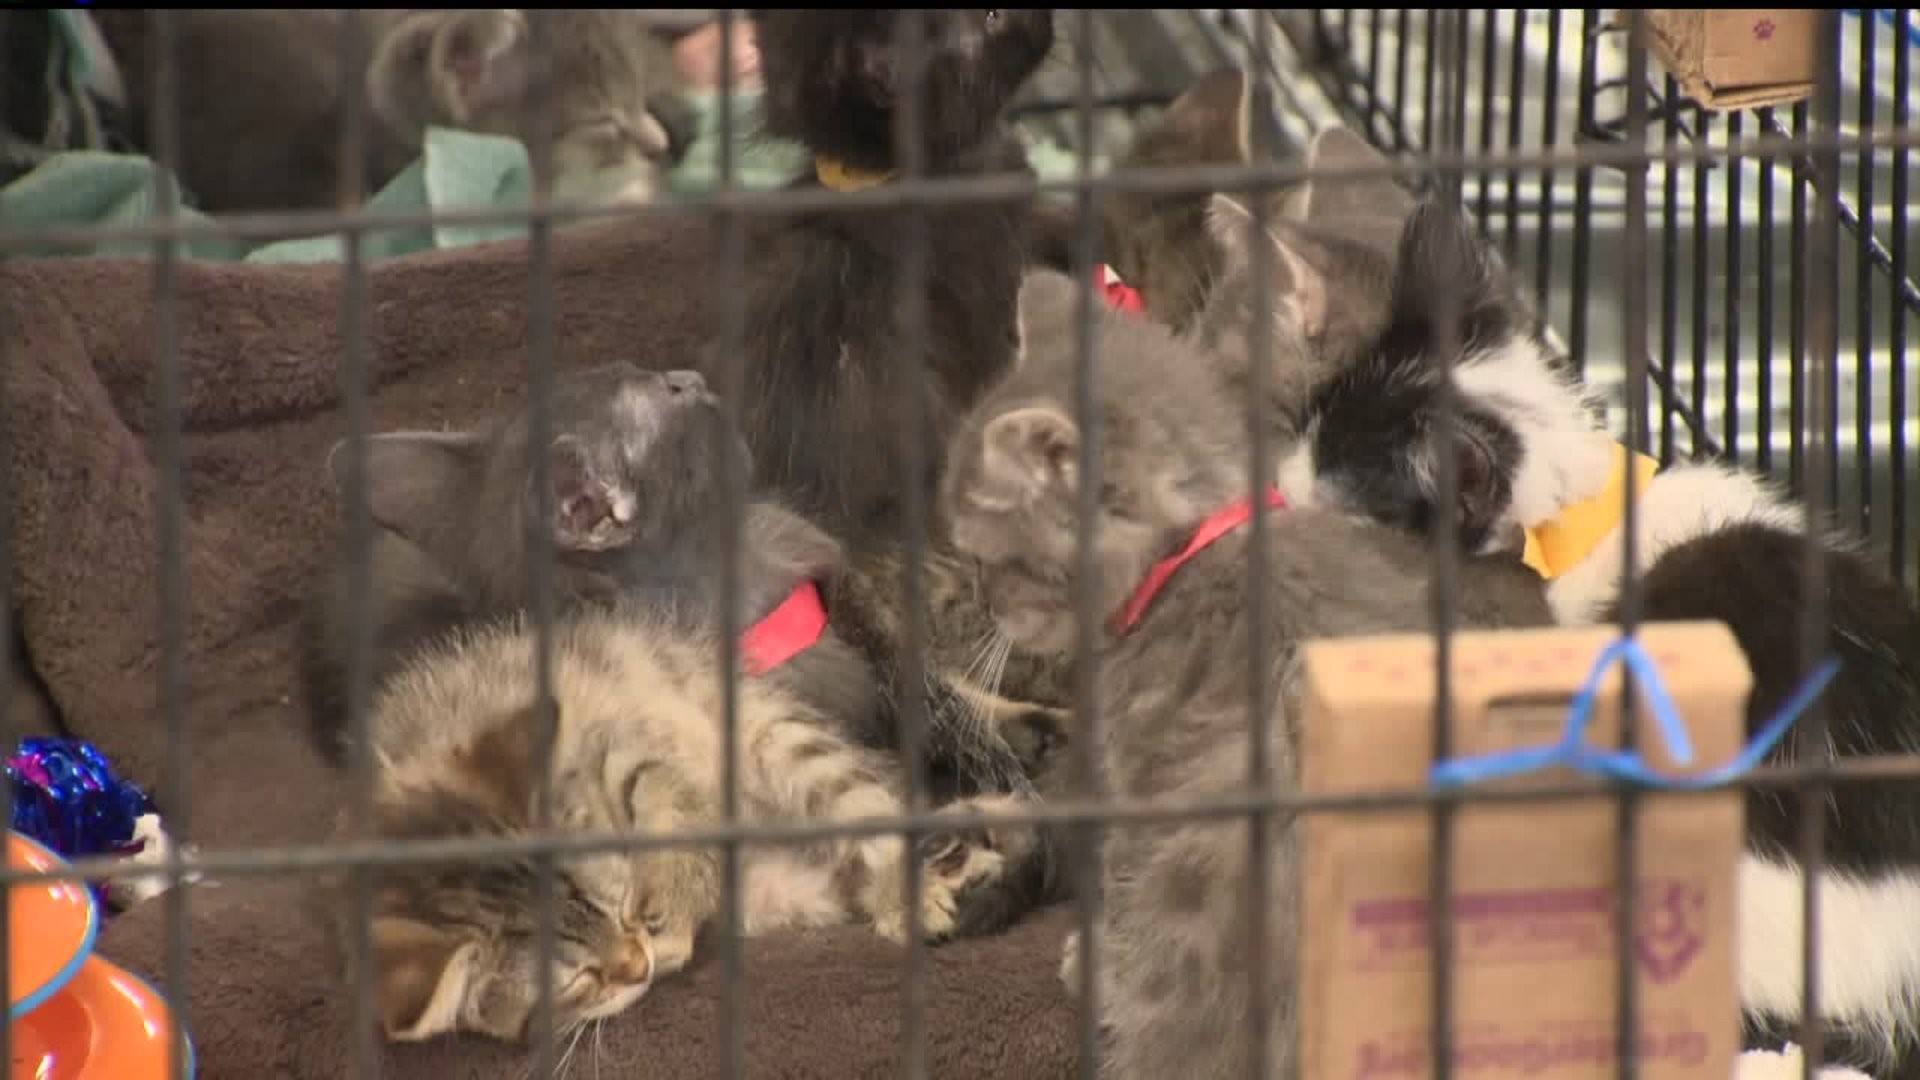 Hundreds of cats found in Iowa hoarding situation, some deceased